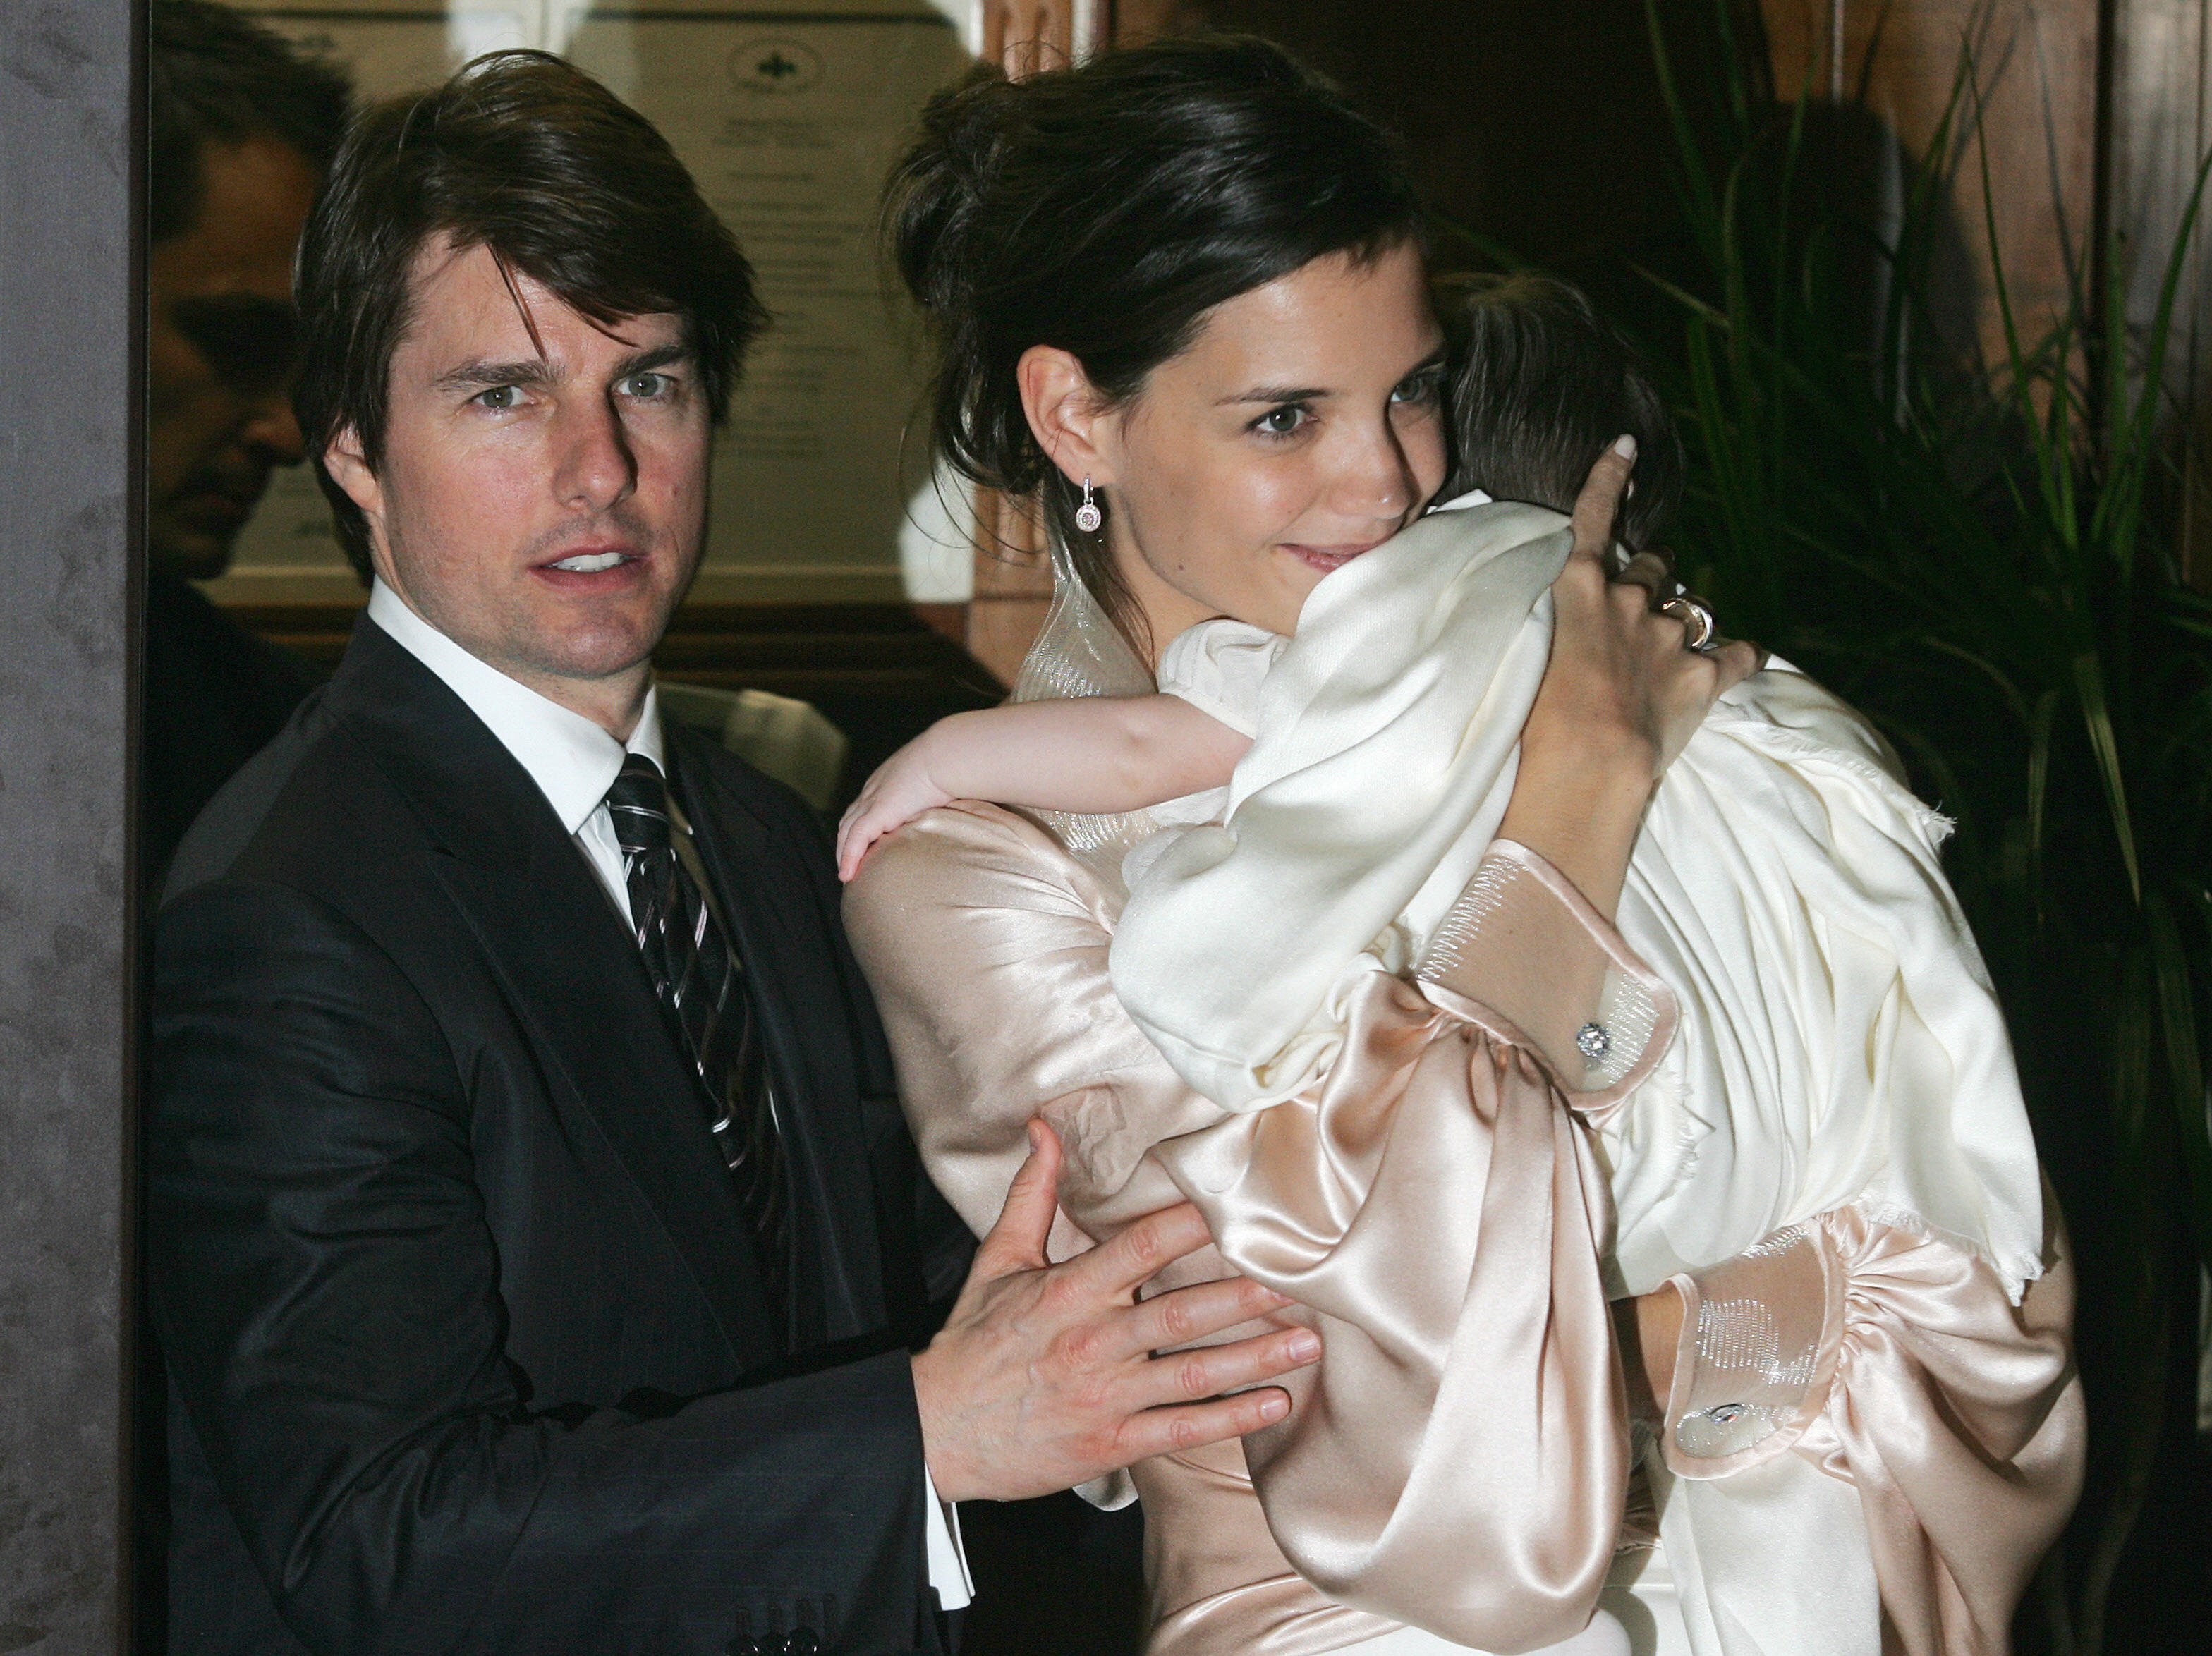 Tom Cruise and his fiancee Katie Holmes with their daughter Suri Cruise, leave a restaurant in central Rome, Italy, on November 17, 2006 | Source: Getty Images